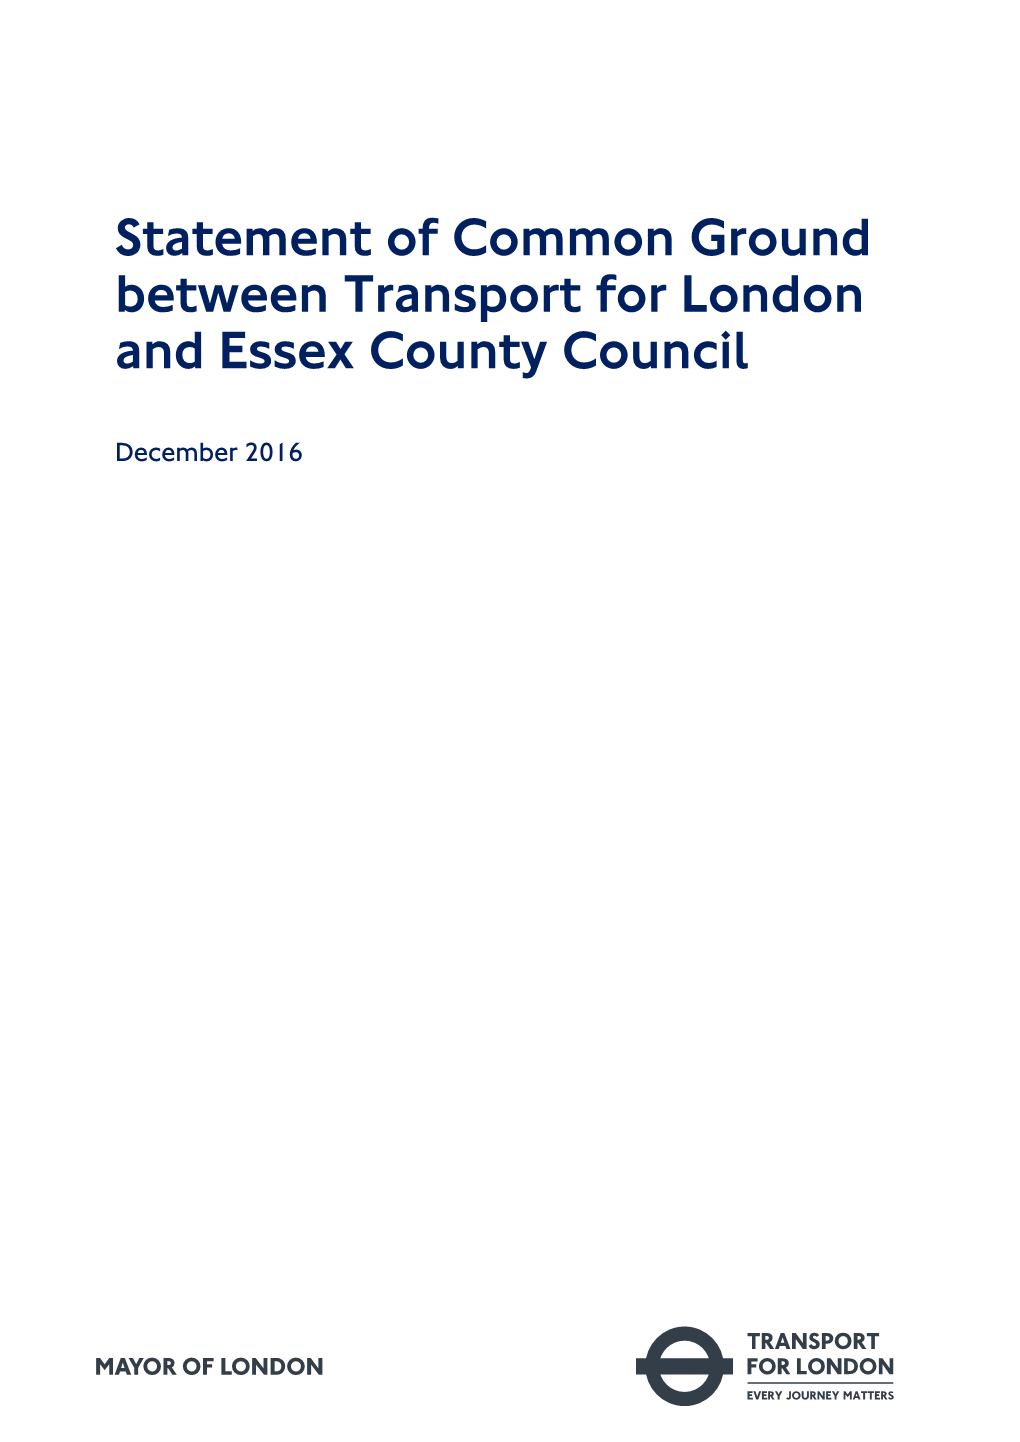 Statement of Common Ground Between Transport for London and Essex County Council